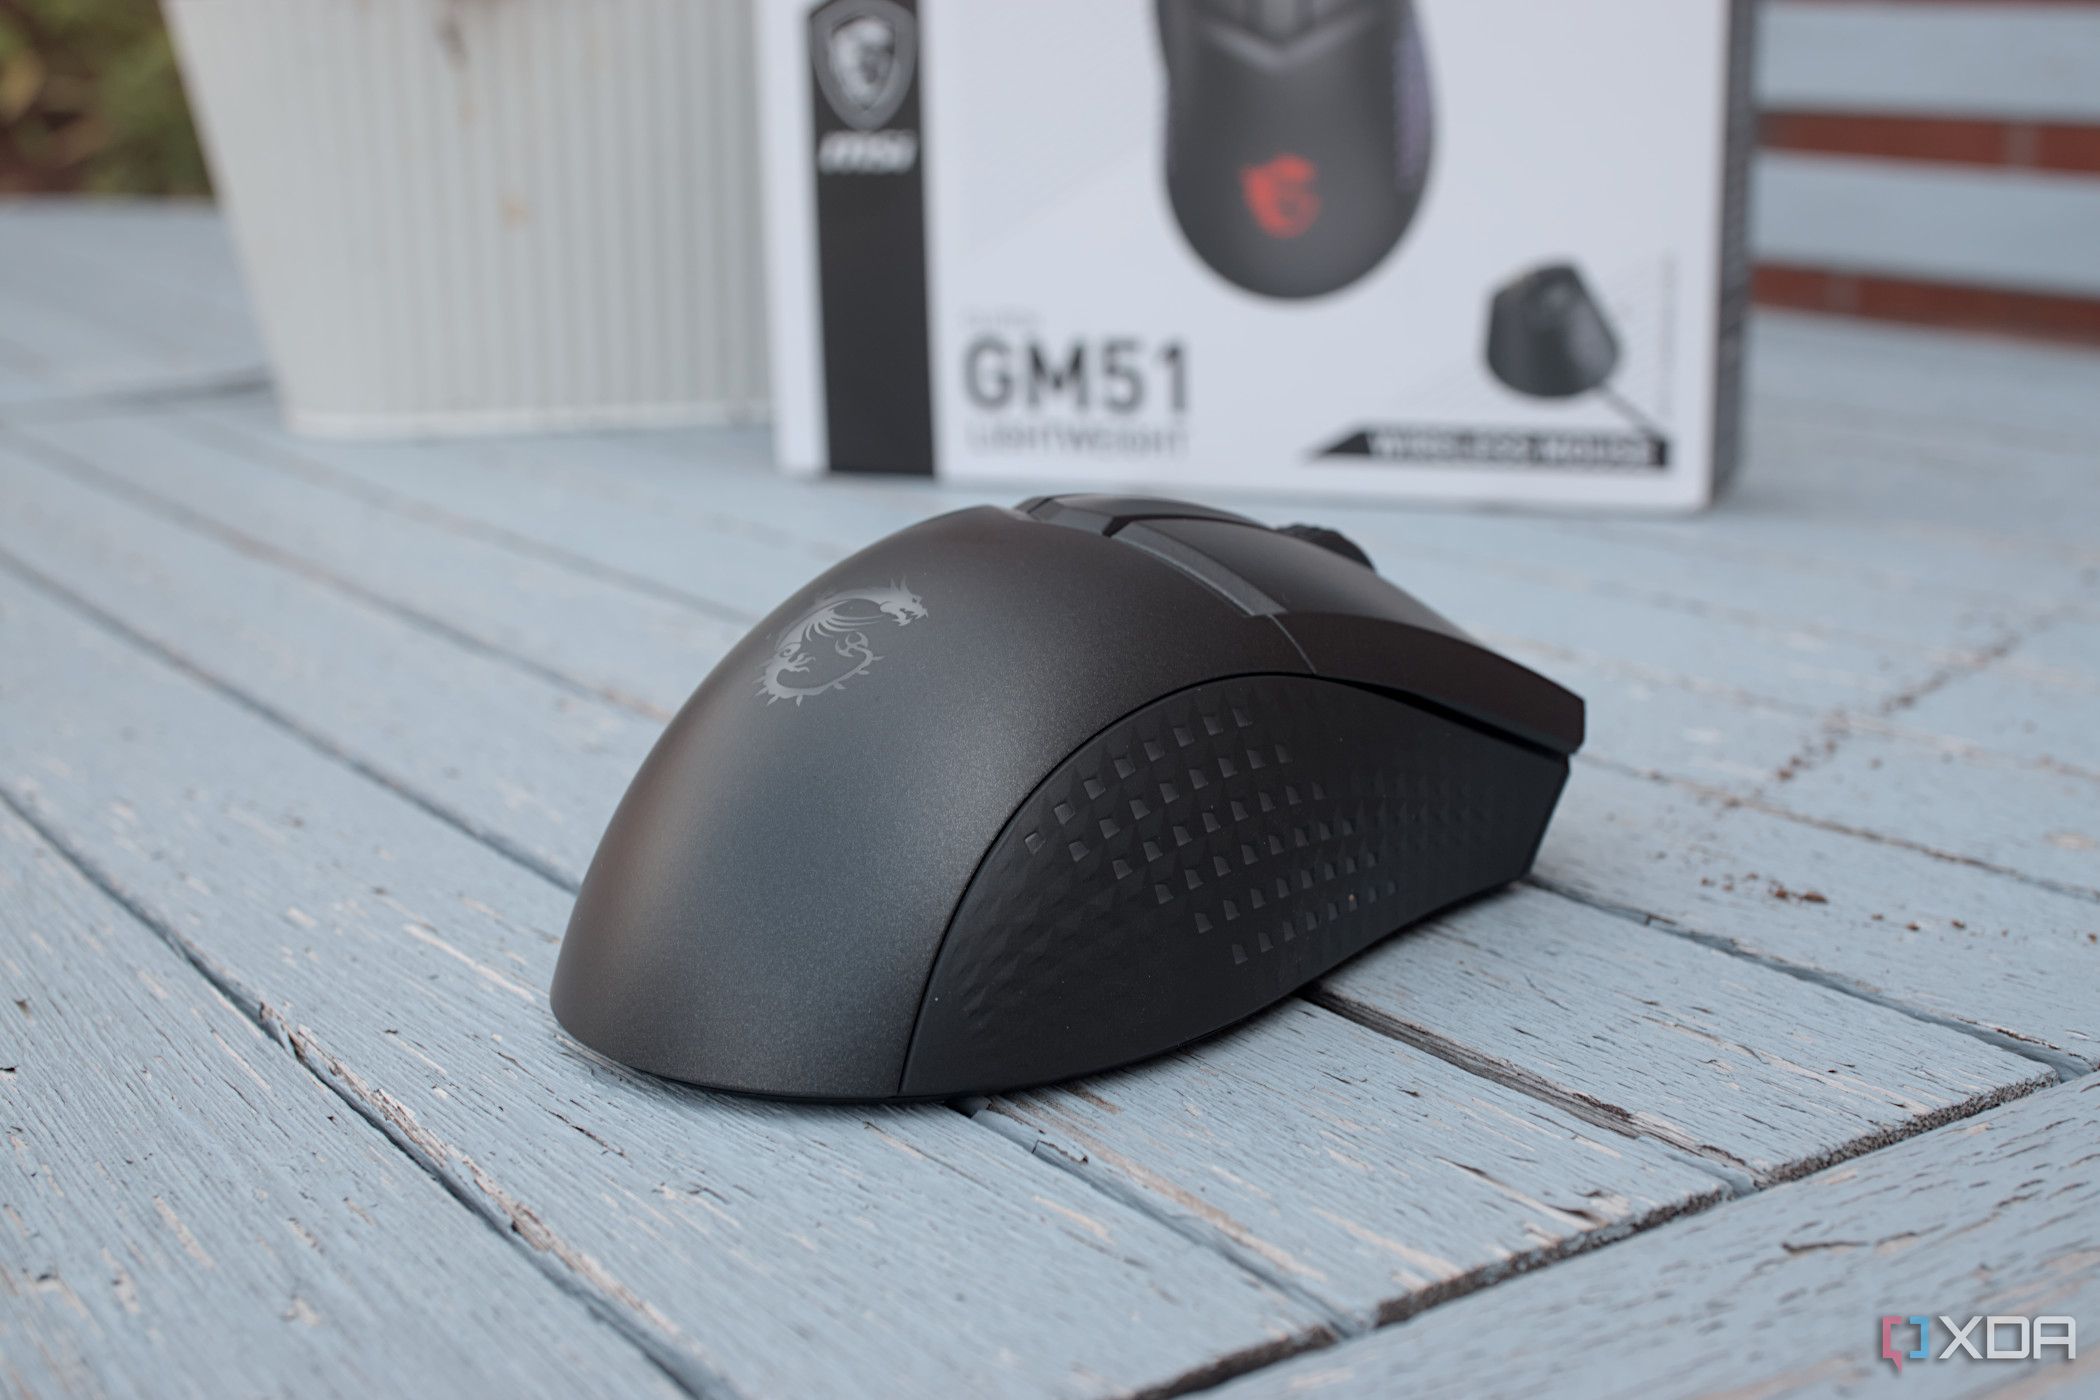 msi-clutch-gm51-lightweight-wireless-review:-a-heavyweight-gaming-mouse